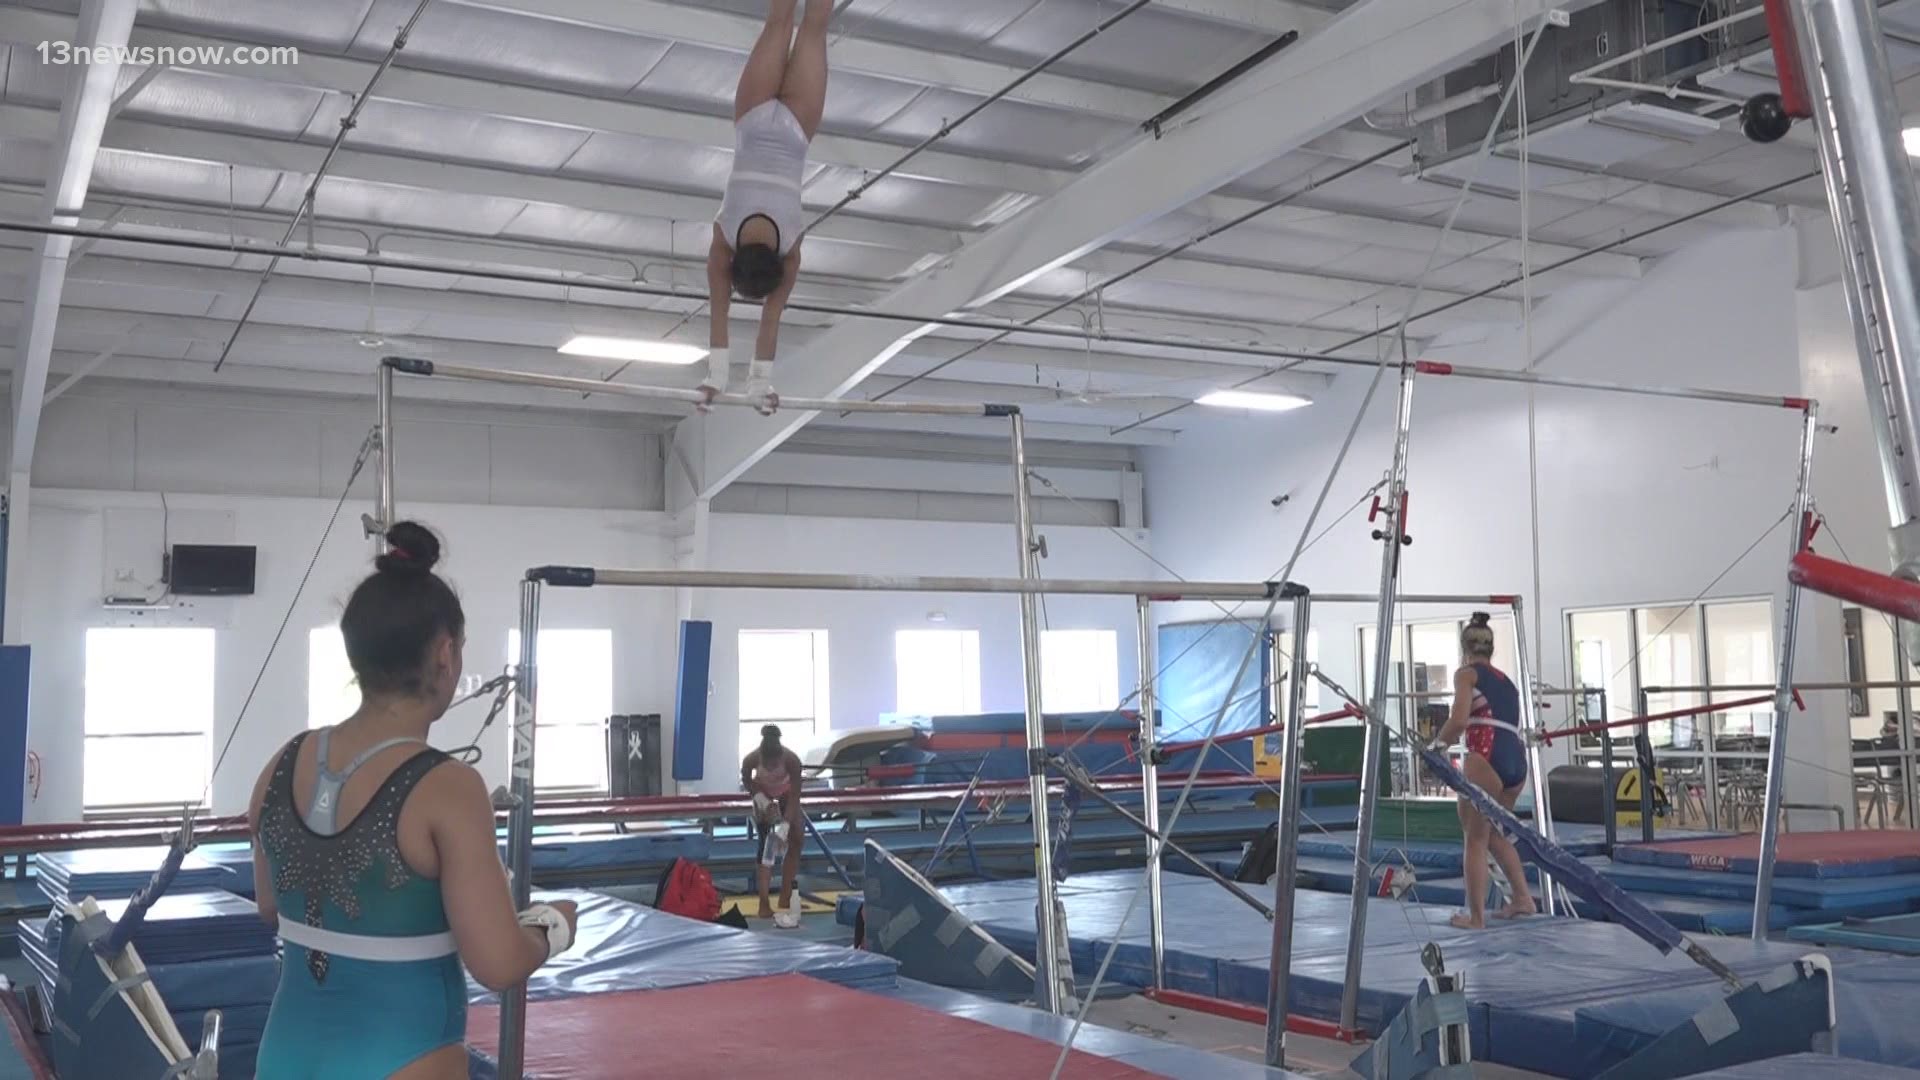 Gymnasts at Excalibur Gymnastics said their training is almost like a full-time job, but Olympic gymnasts like Simone Biles help them push through those long hours.